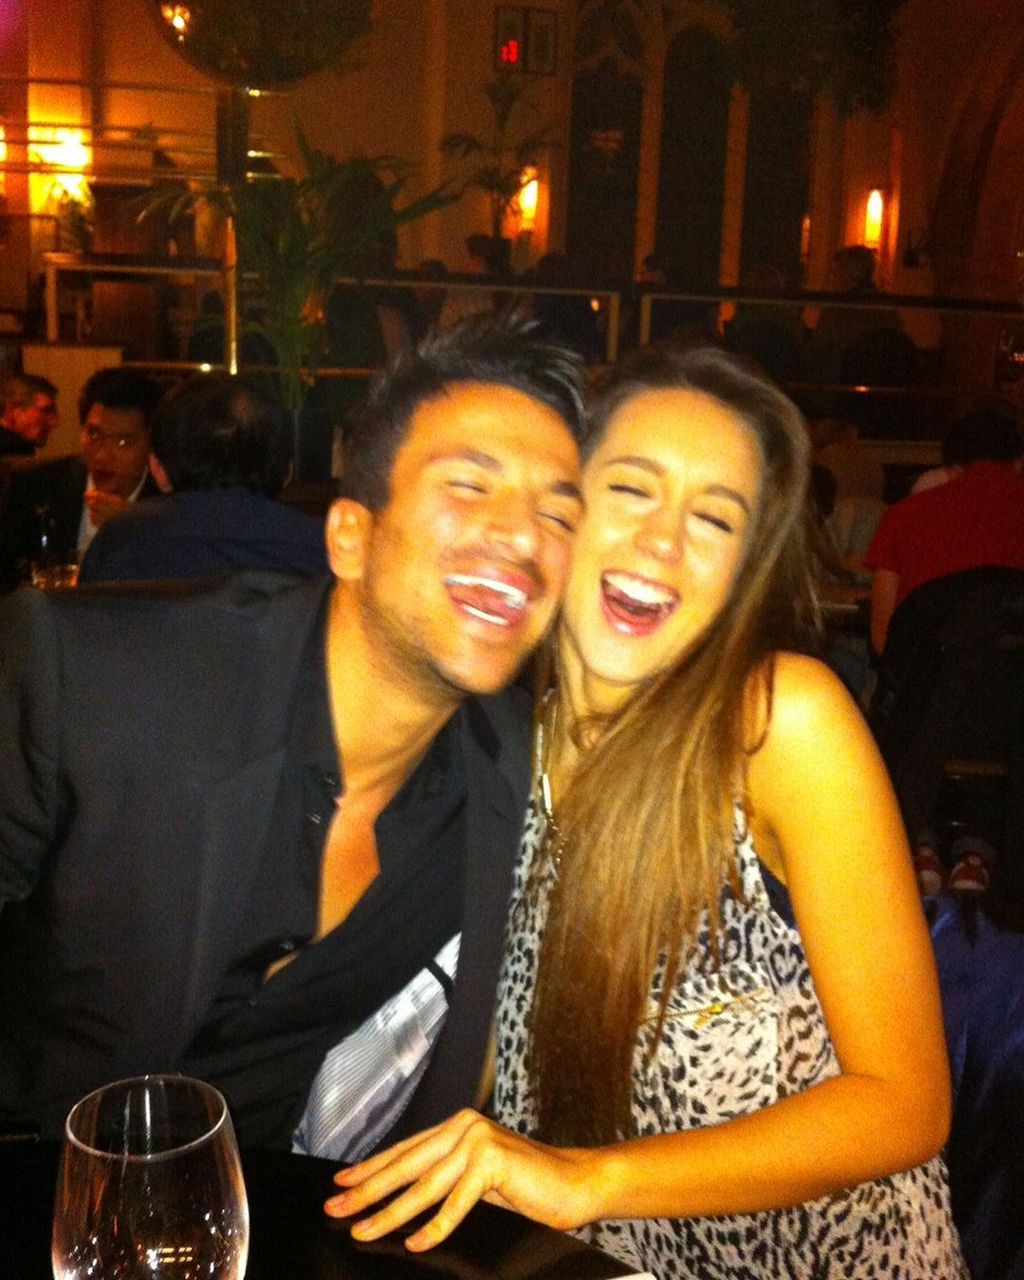 Emily and Peter Andre smiling in a resturant